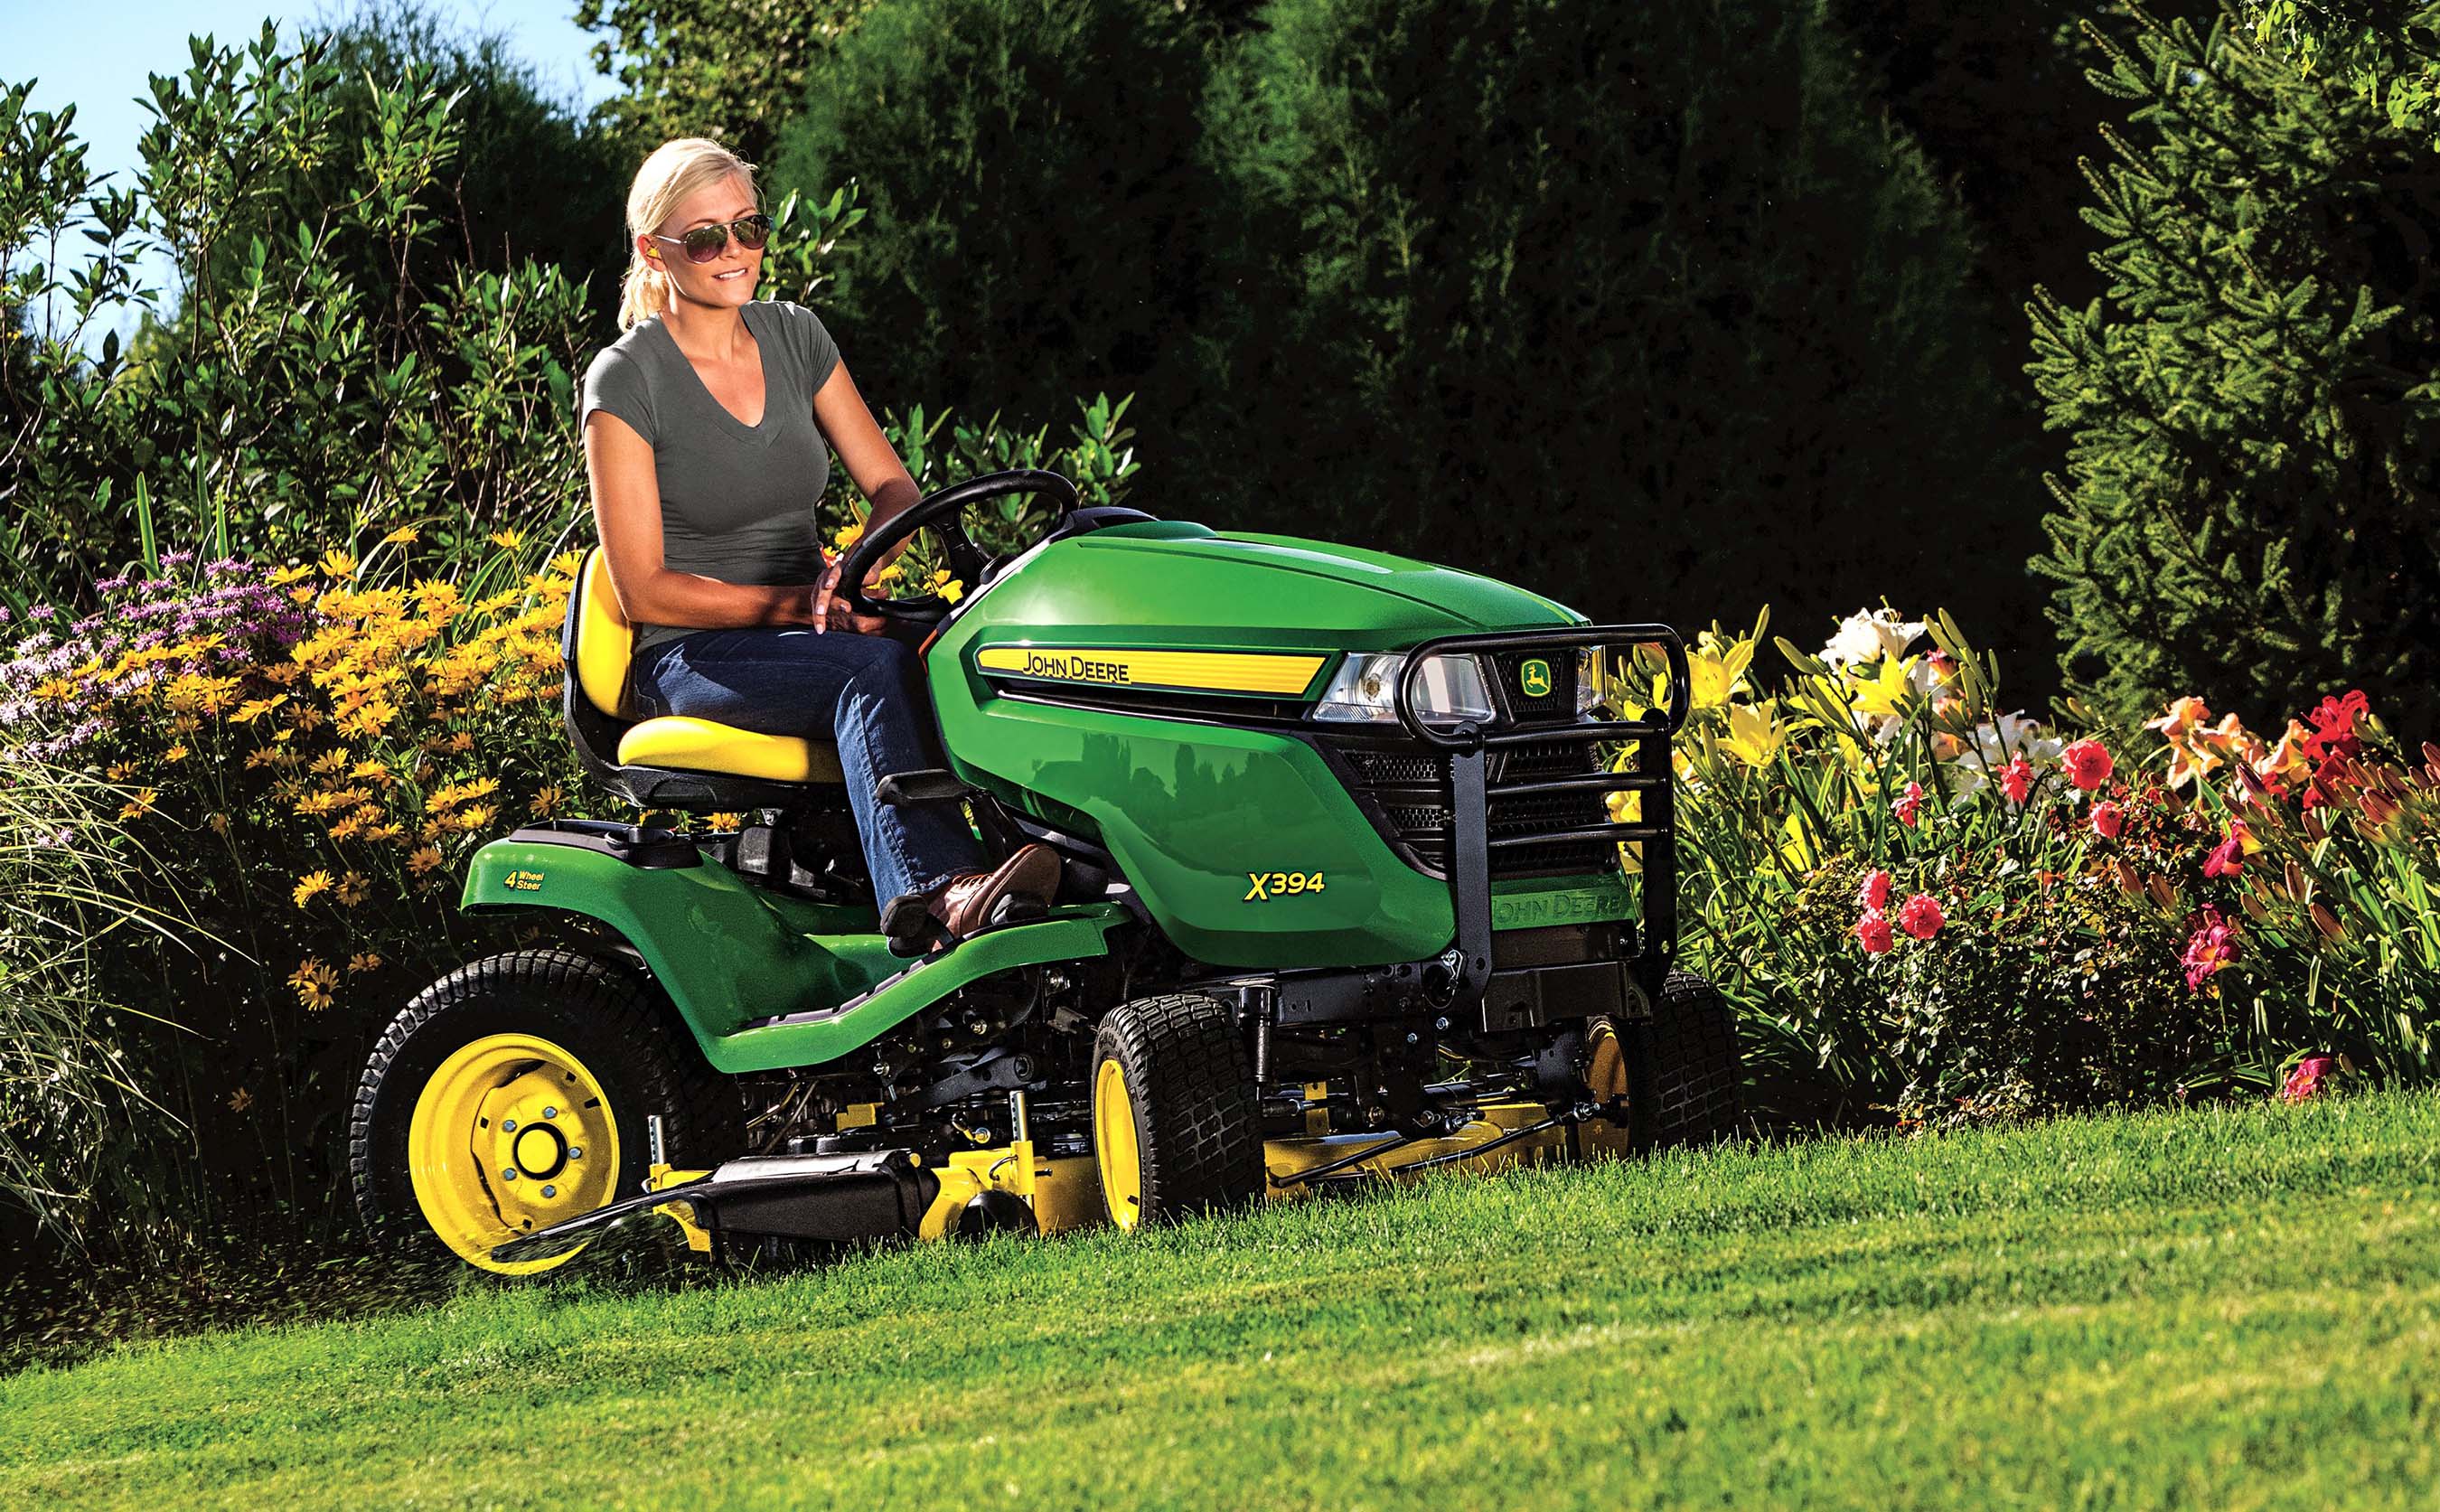 The John Deere X394 Select Series tractor mower has four-wheel steering for superior maneuverability.